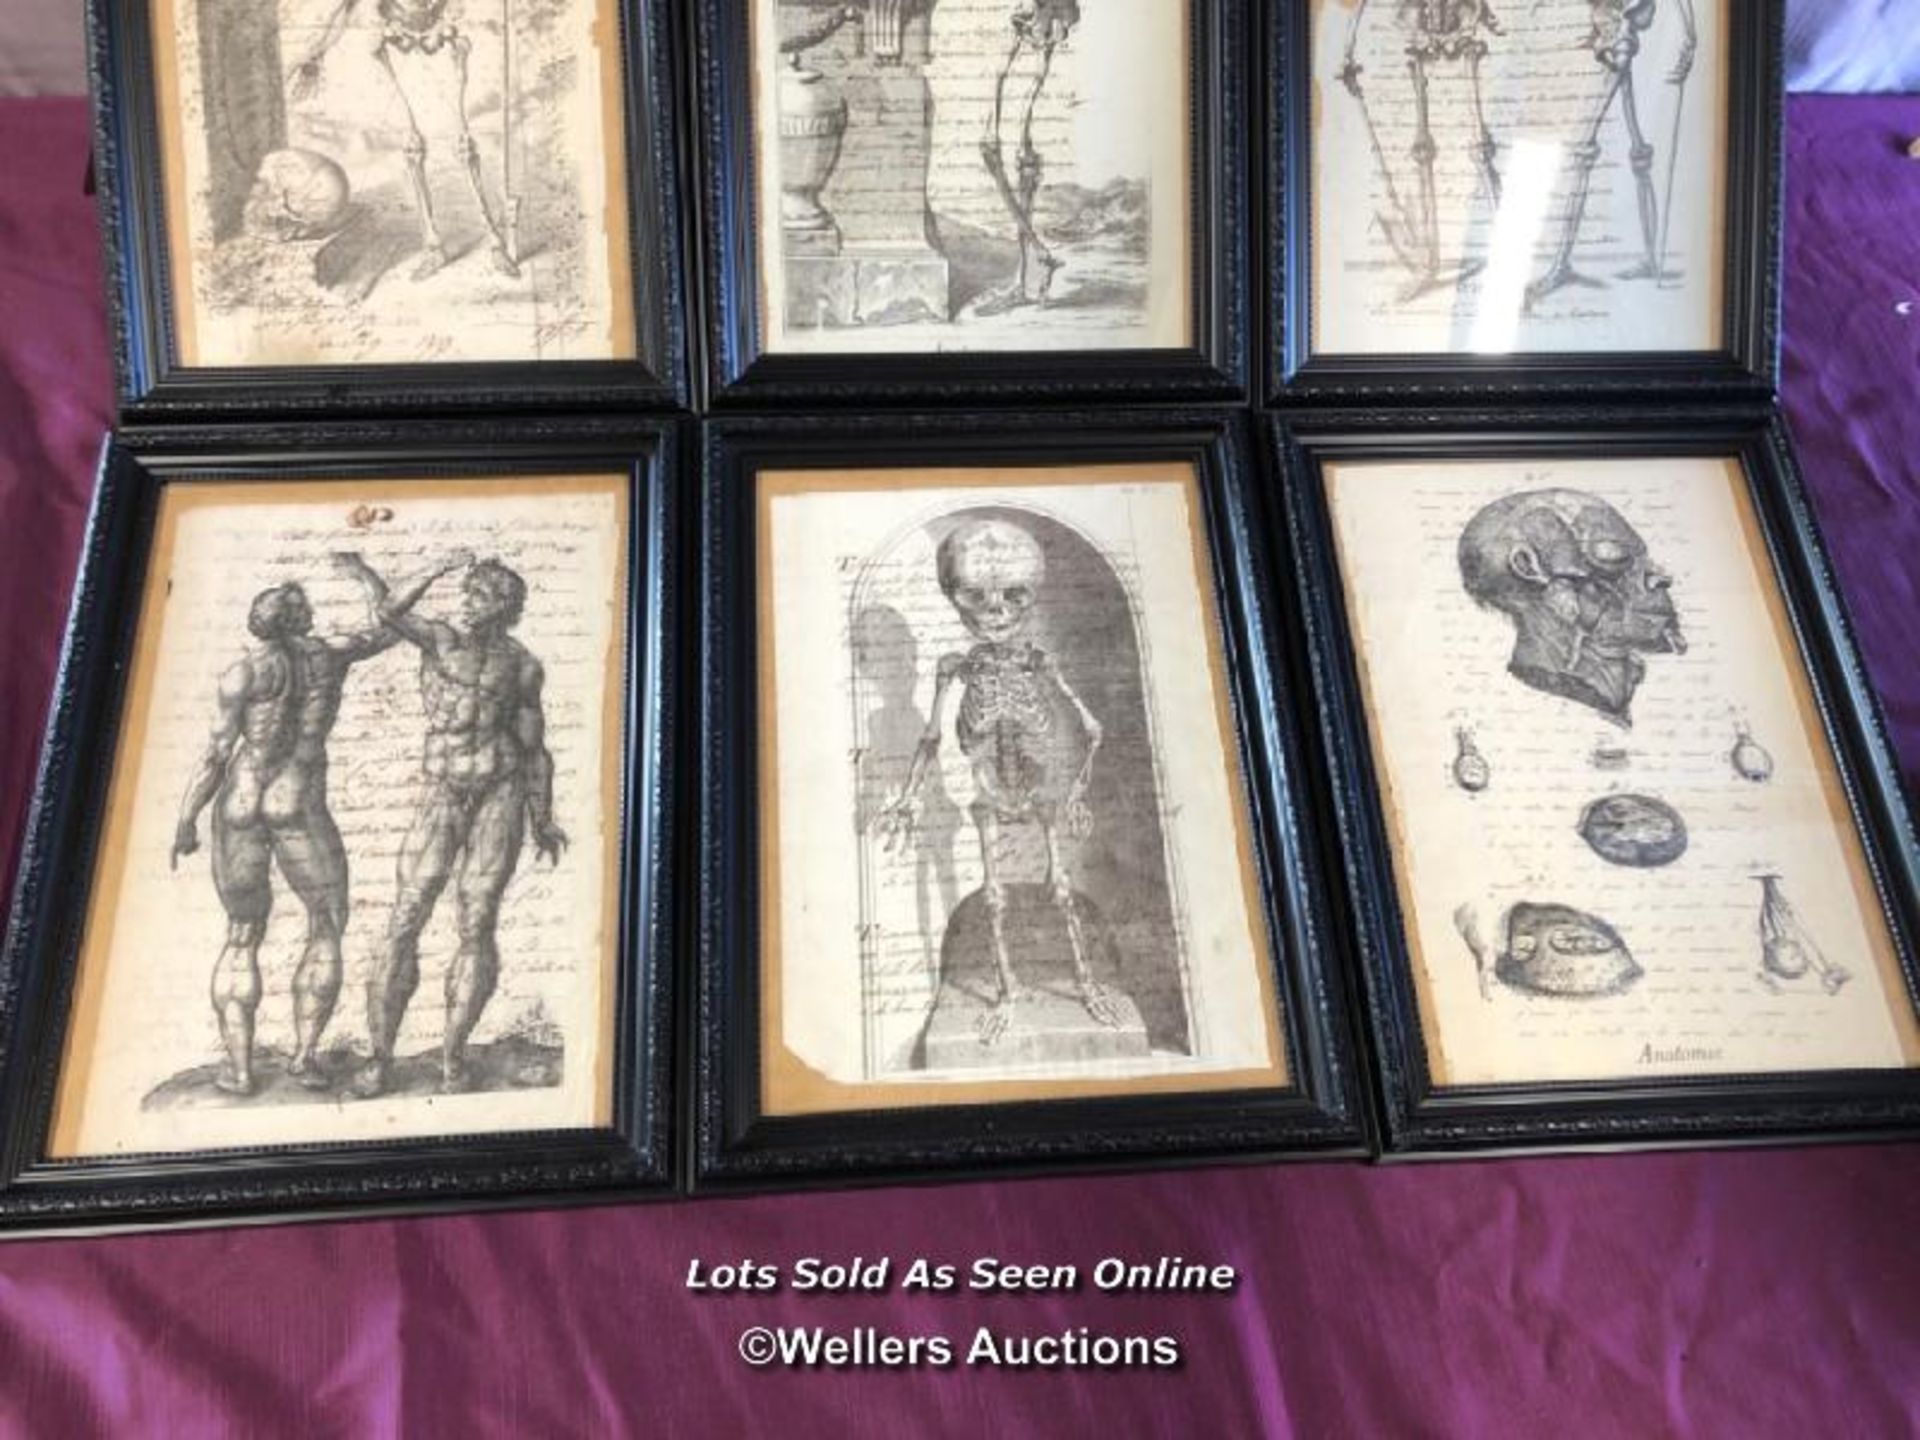 TEN FRAMED AND GLAZED ANATOMICAL AND SKELETAL 18TH CENTURY ENGRAVINGS, OVERWRITTEN, FRAME SIZE 30. - Image 5 of 5